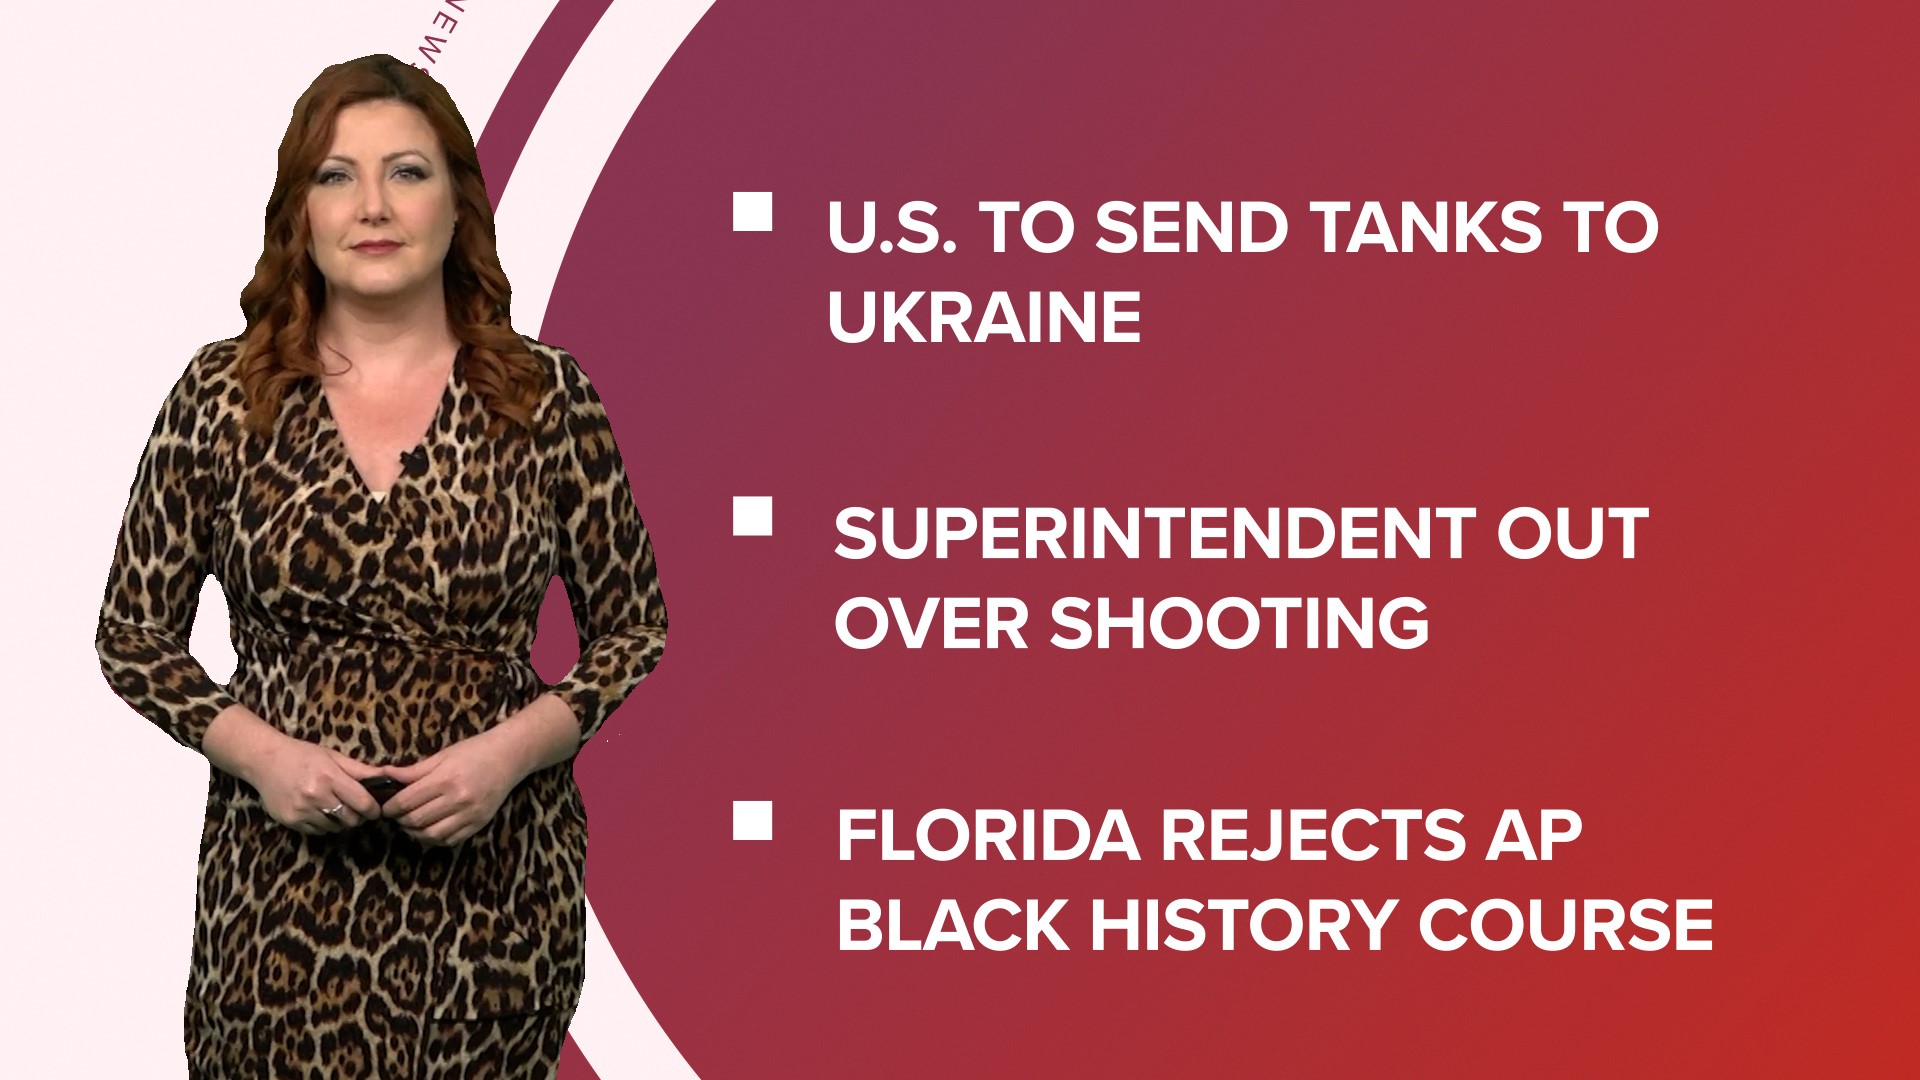 A look at what is happening in the news from the US sending tanks to Ukraine to backlash over Florida's rejection of an AP African American studies course.